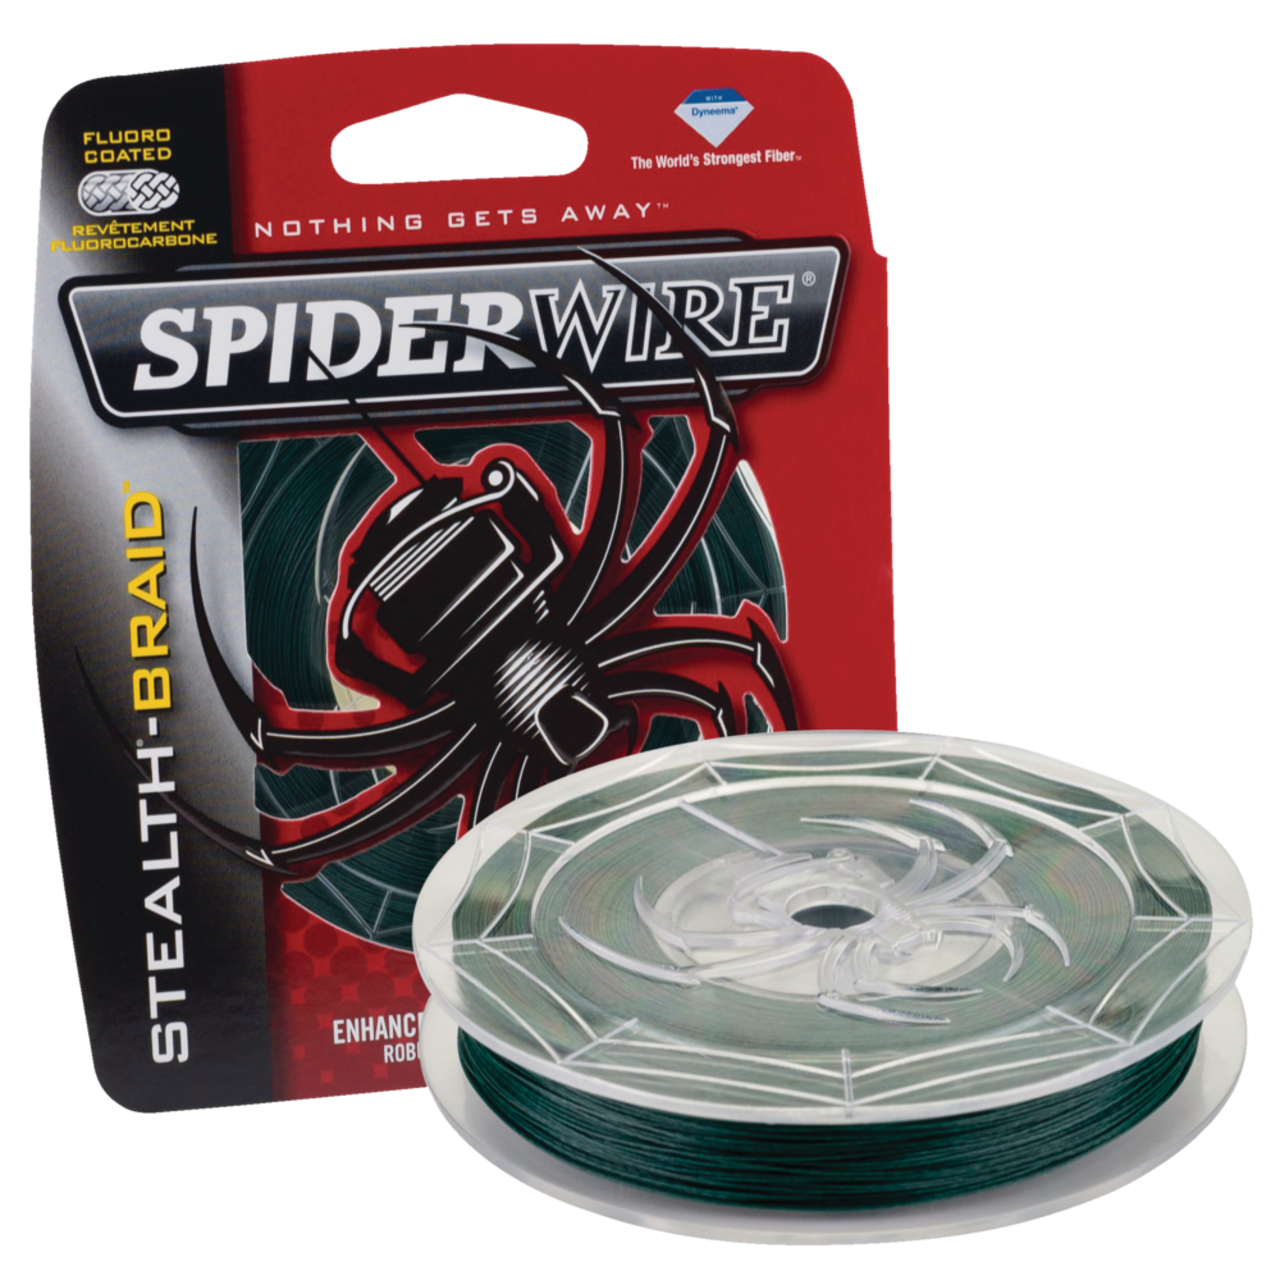 https://media-www.canadiantire.ca/product/playing/fishing/fishing-accessories/0771186/spiderwire-stealth-moss-green-100lb-250-yards-7b4364e8-f73c-4370-8271-d3a37db937d7.png?imdensity=1&imwidth=1244&impolicy=mZoom